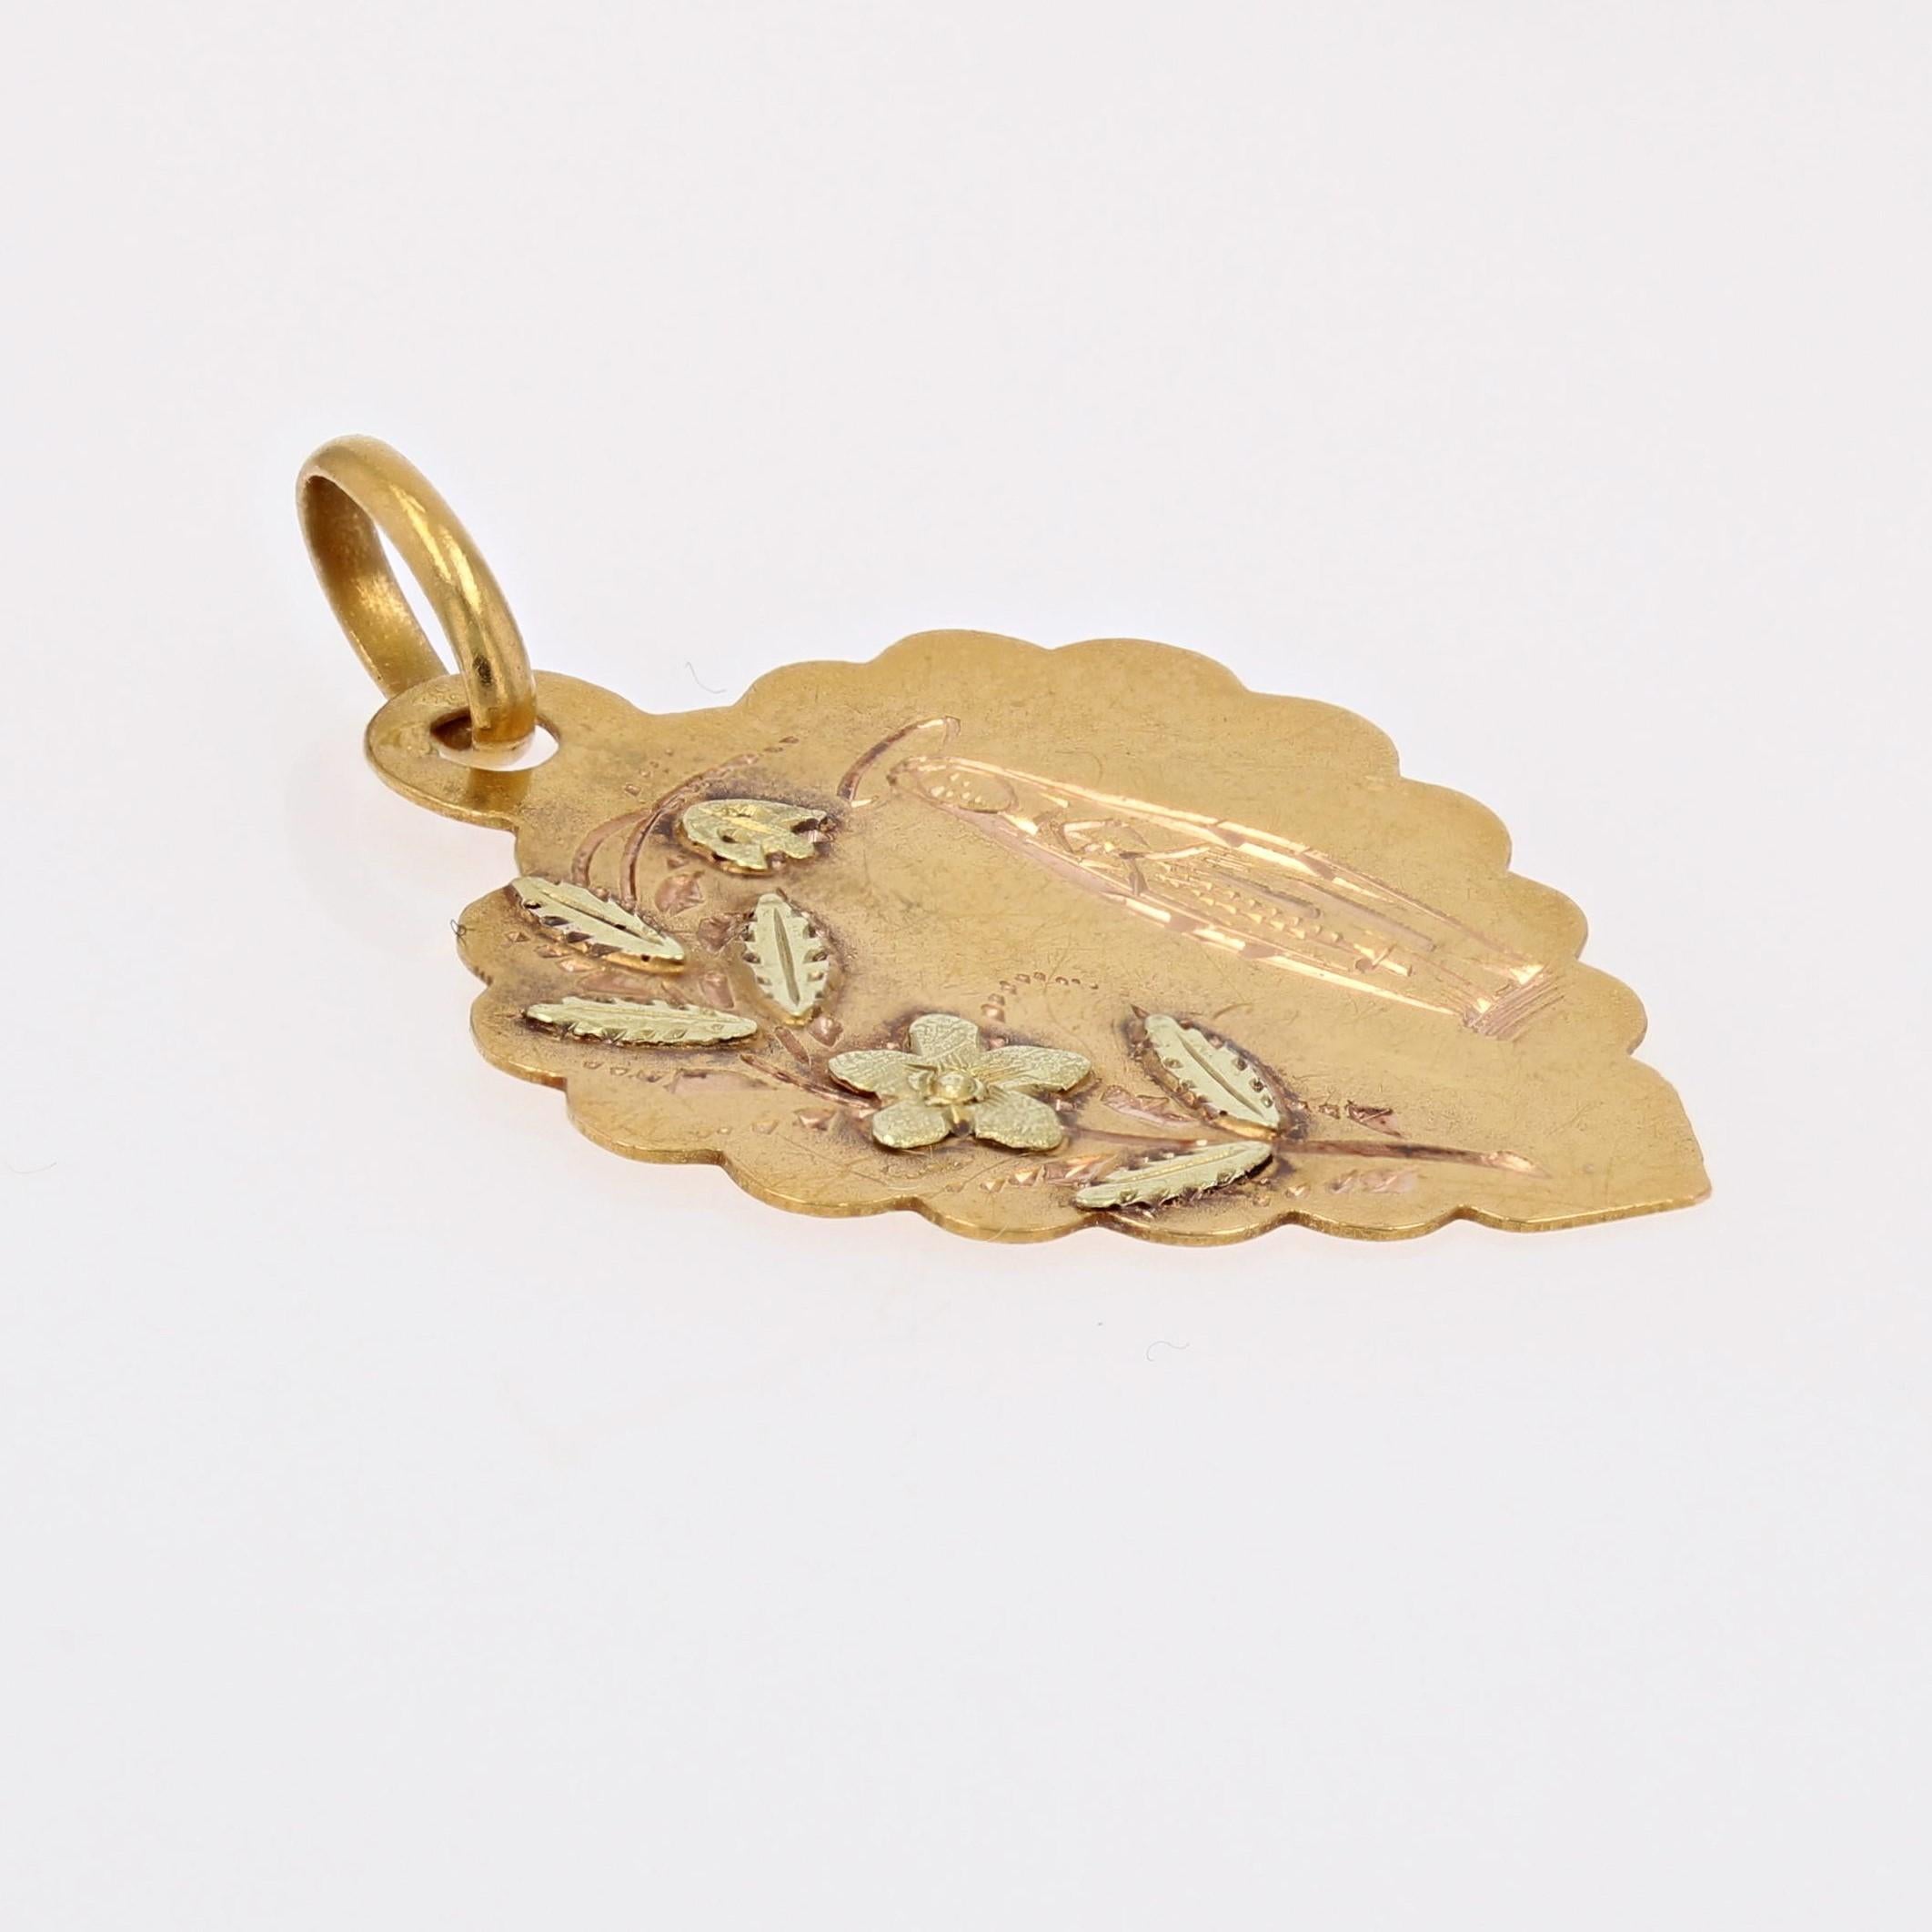 Medal in 18 karat yellow and green gold, eagle head hallmark.
This antique heart- shape medal, represents the sanctuary of 